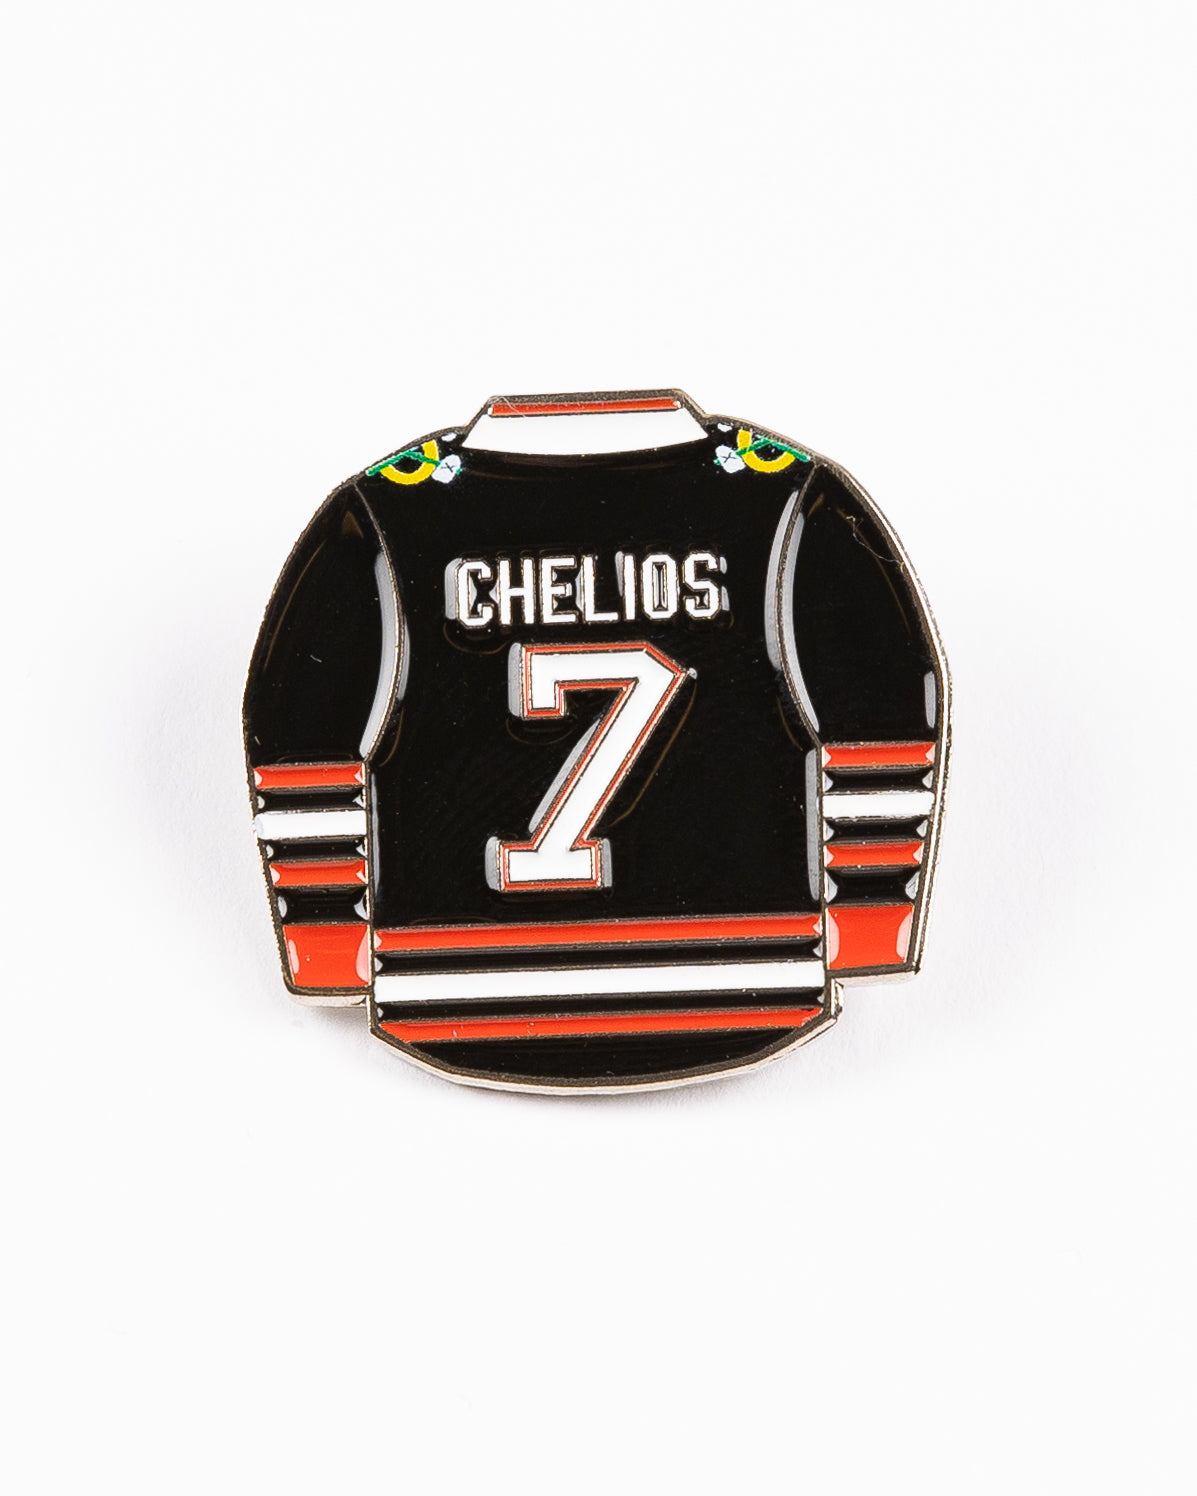 pin with Chicago Blackhawks jersey inspired design for Chris Chelios retirement - front lay flat